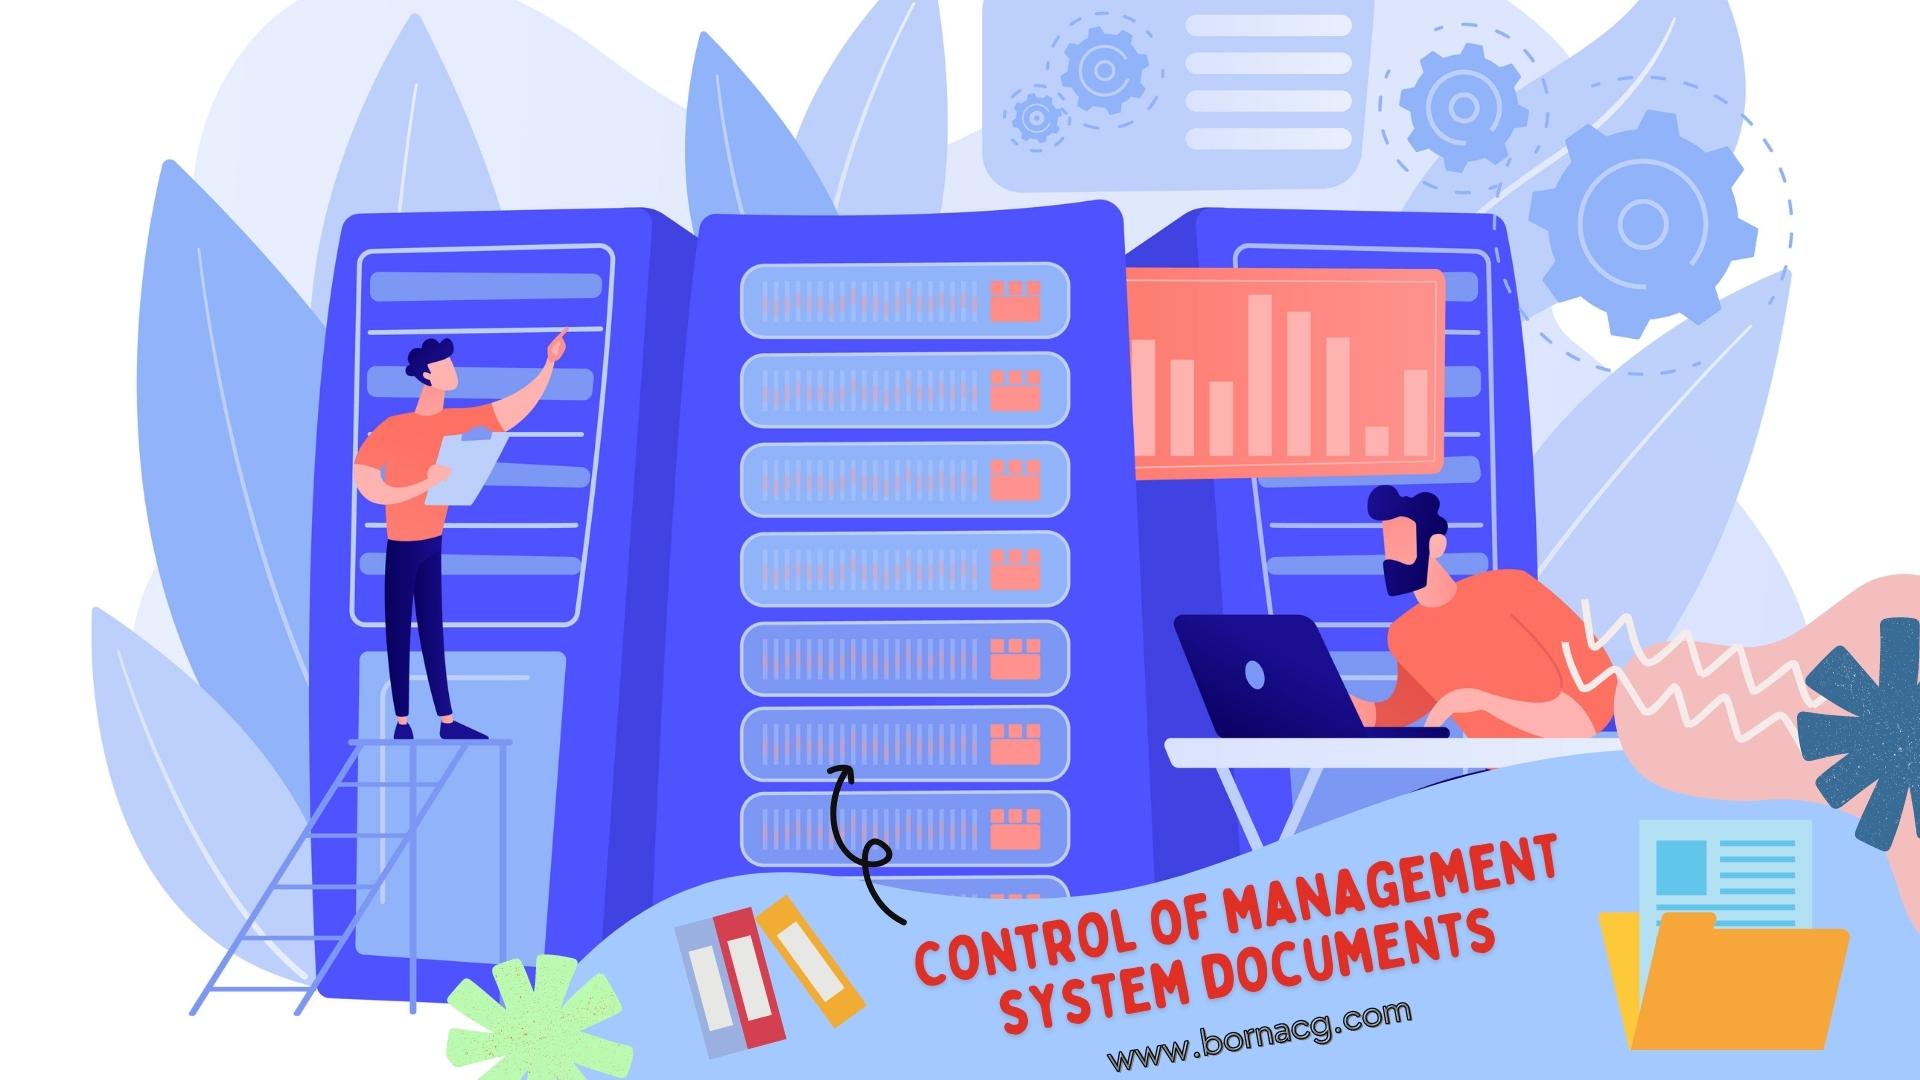 Control of management system documents